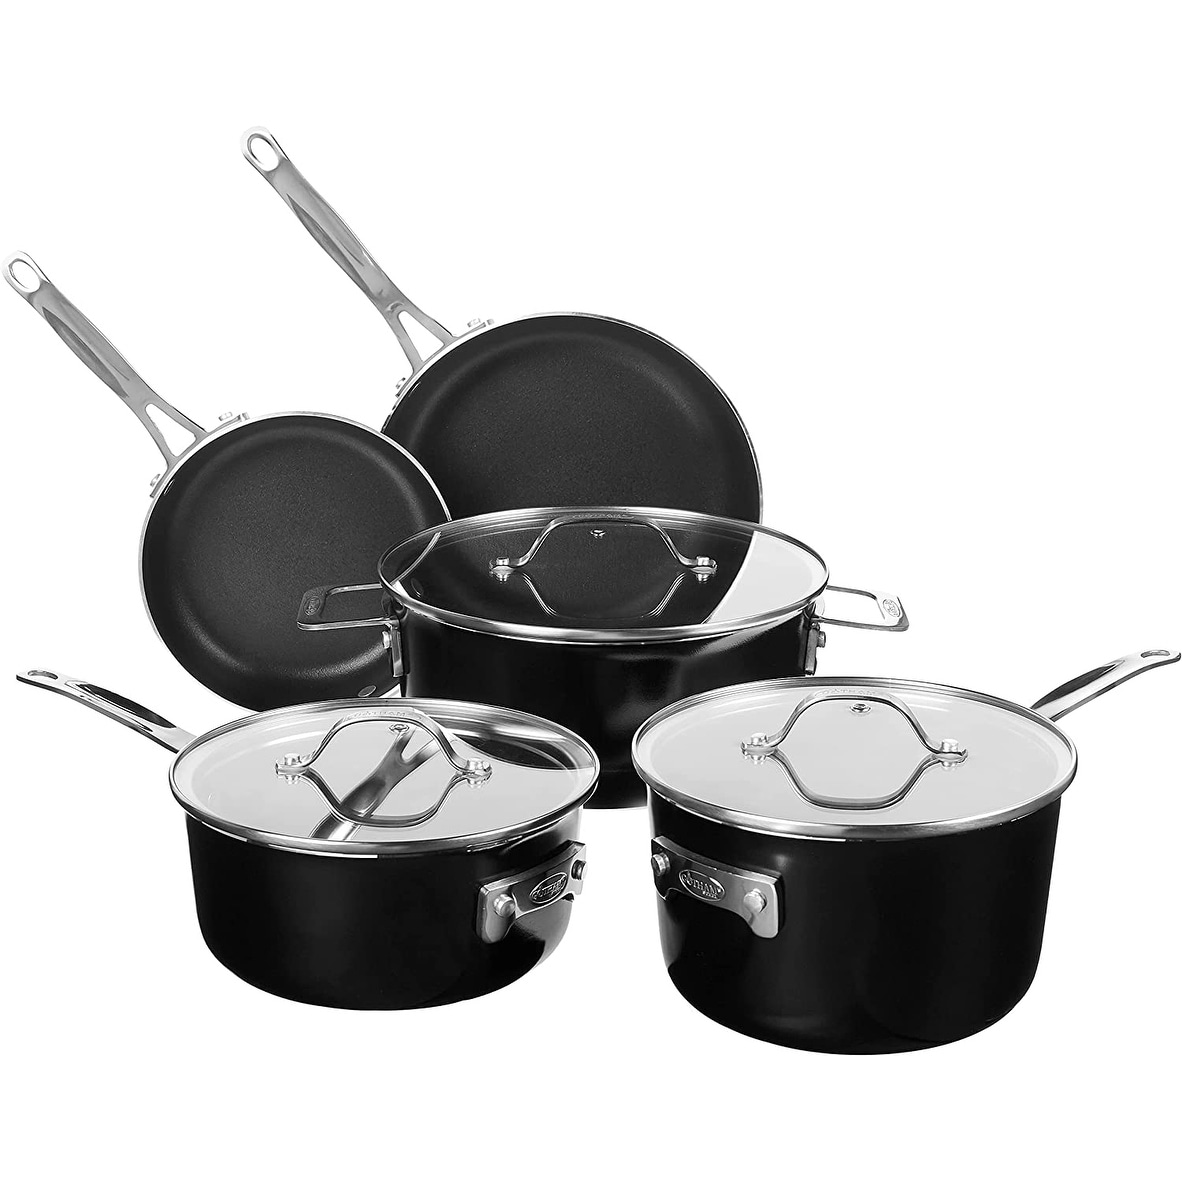 https://ak1.ostkcdn.com/images/products/is/images/direct/a4eae725c251989b0671a50103909d0531cf1a48/Stackable-Pots-and-Pans-Stackmaster-10-Piece-Cookware-Set-with-Ultra-Nonstick-Cast-Texture-Ceramic-Coating%2C-Copper.jpg